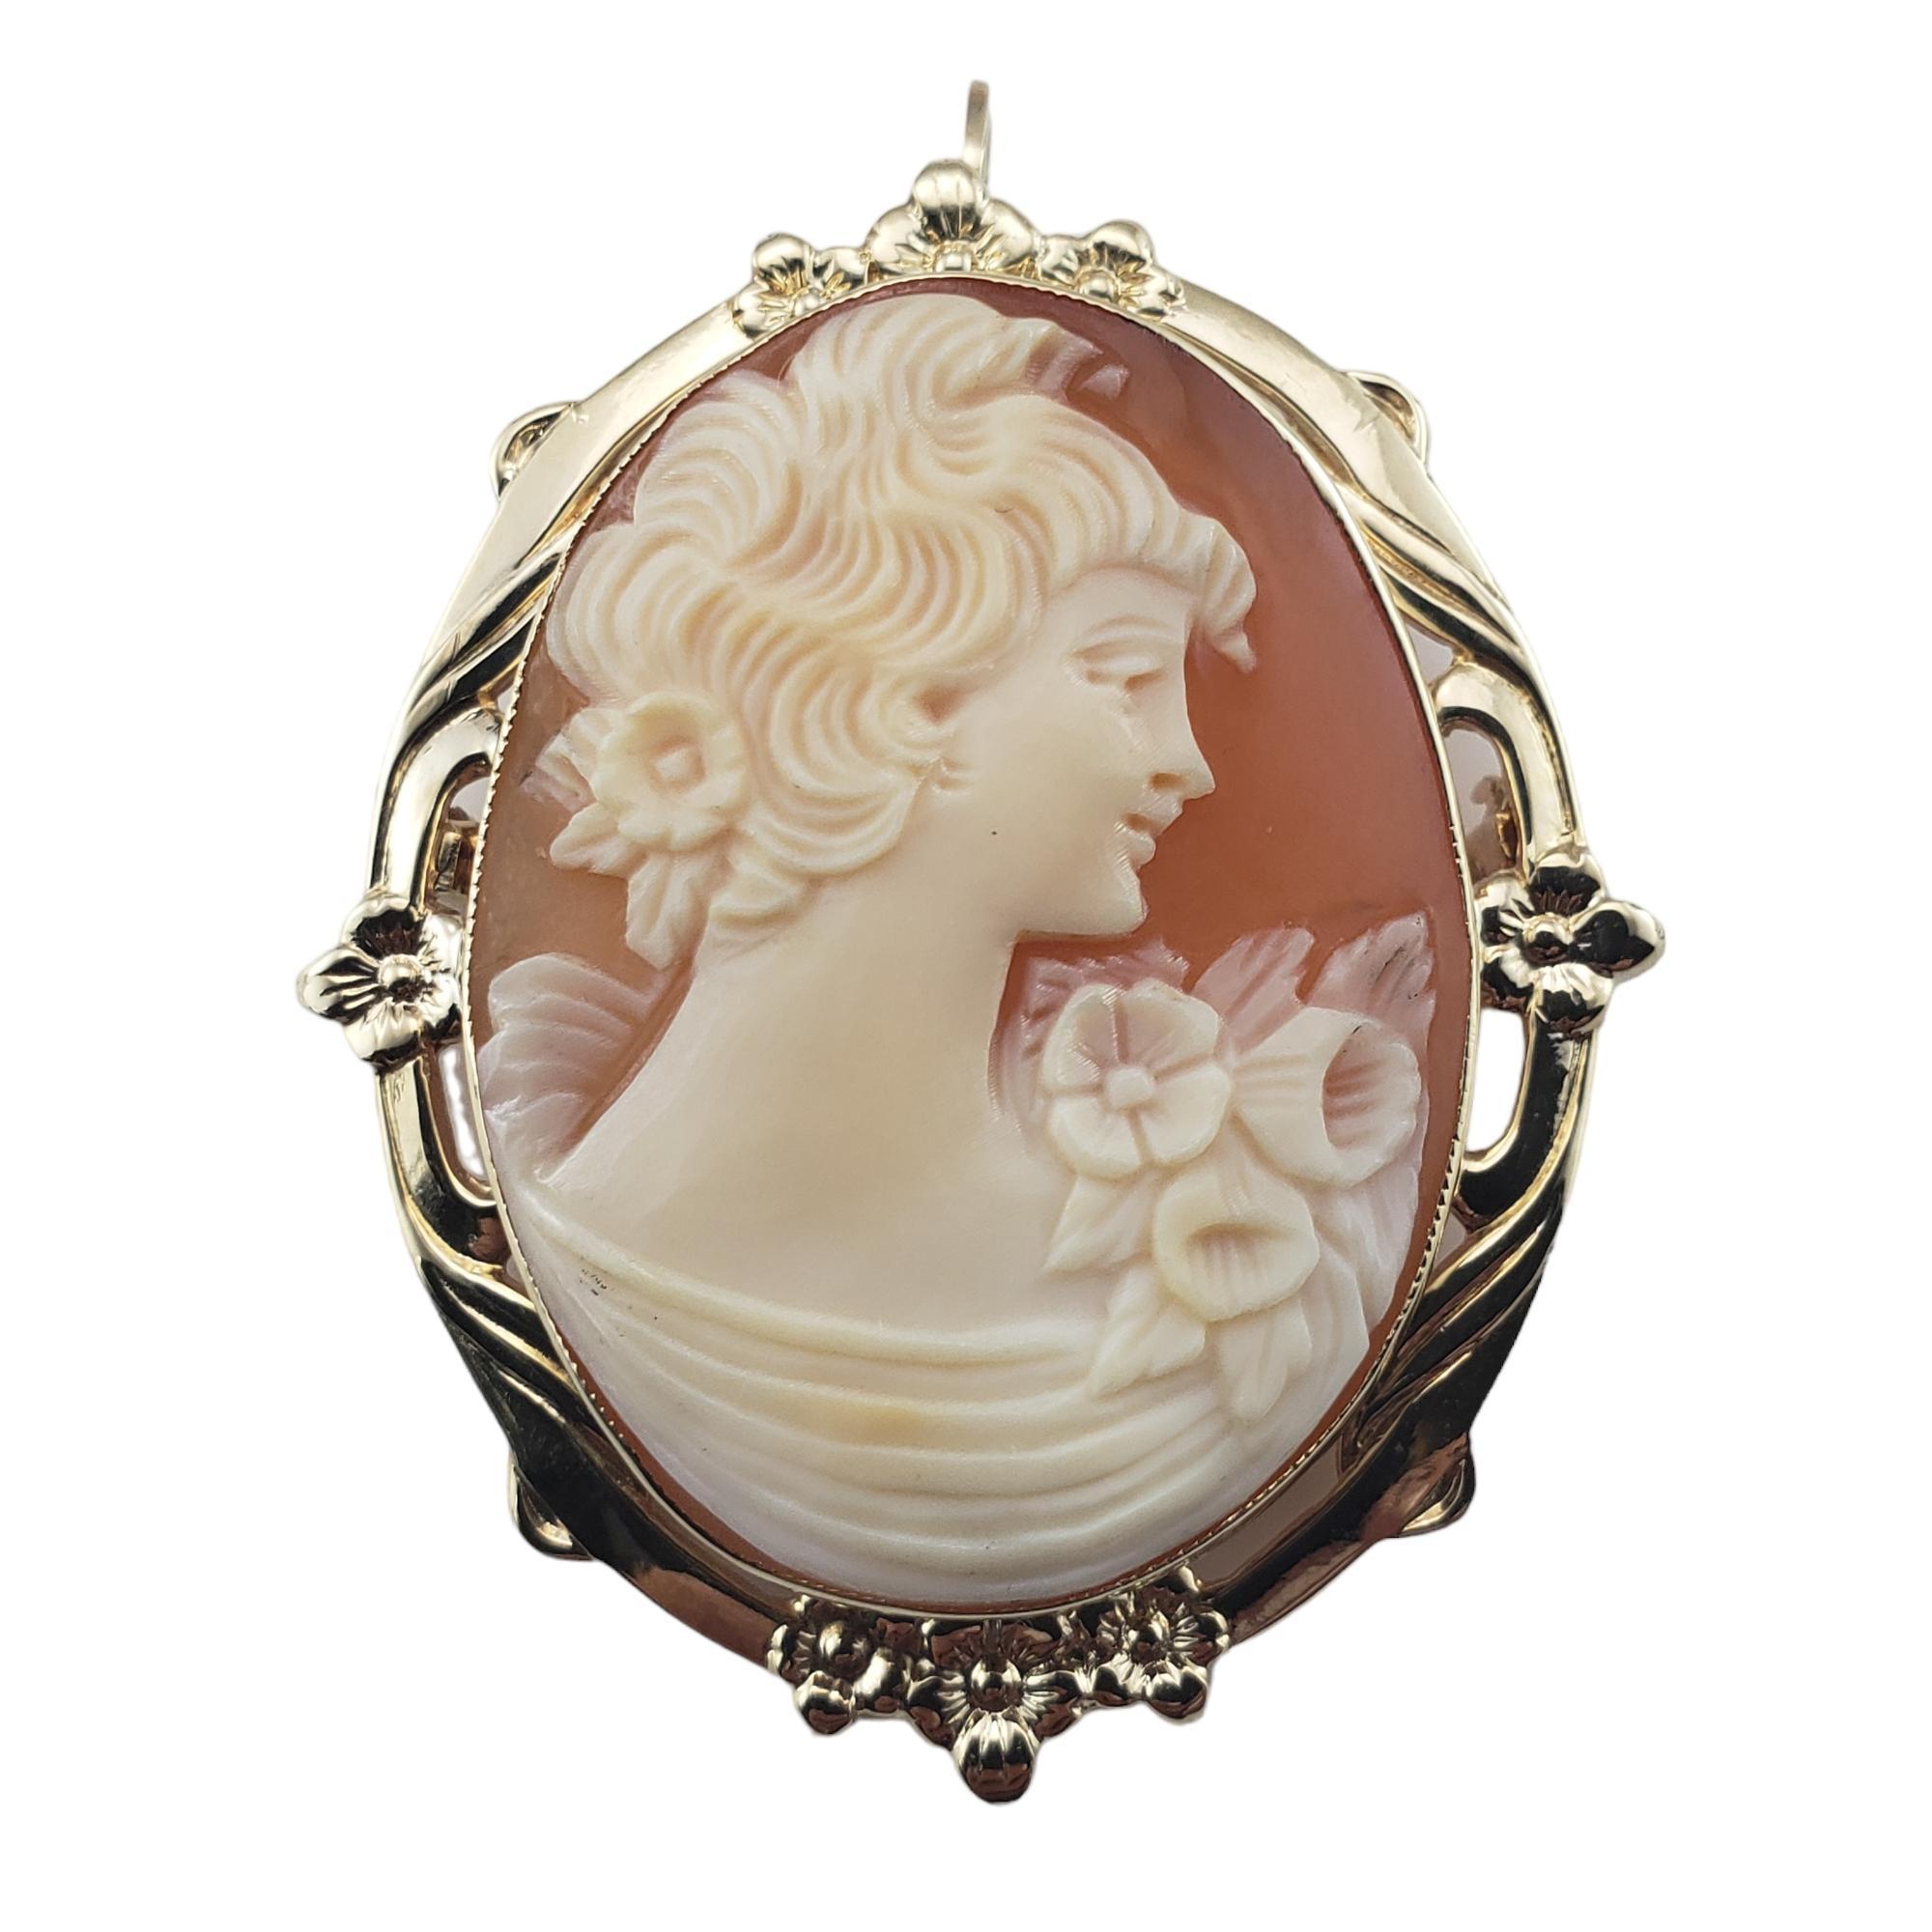 Vintage 10 Karat Yellow Gold Cameo Brooch/Pendant-

This elegant brooch features a lovely lady in profile set in beautifully detailed 10K yellow gold.

Size: 38.8 mm x 32 mm

Weight: 5.3 gr./ 3.4 dwt.

Stamped: 10K

Very good condition,